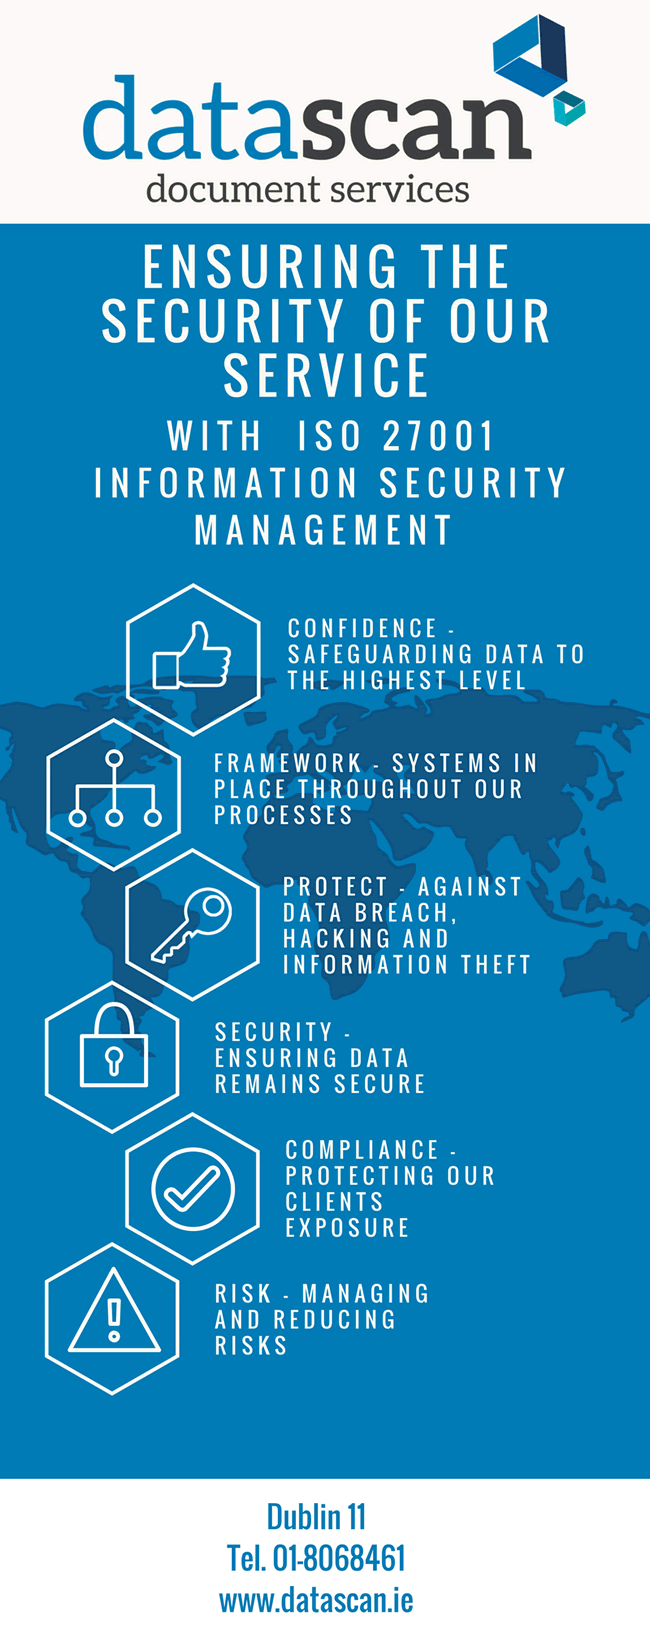 Security of information and services has become even more important for Datascan and its customers in times of regulatory pressure and the GDPR for which the company prepared in several ways in order to serve its customers better and respond to changing requirements - source and courtesy Datascan Document Services on Twitter